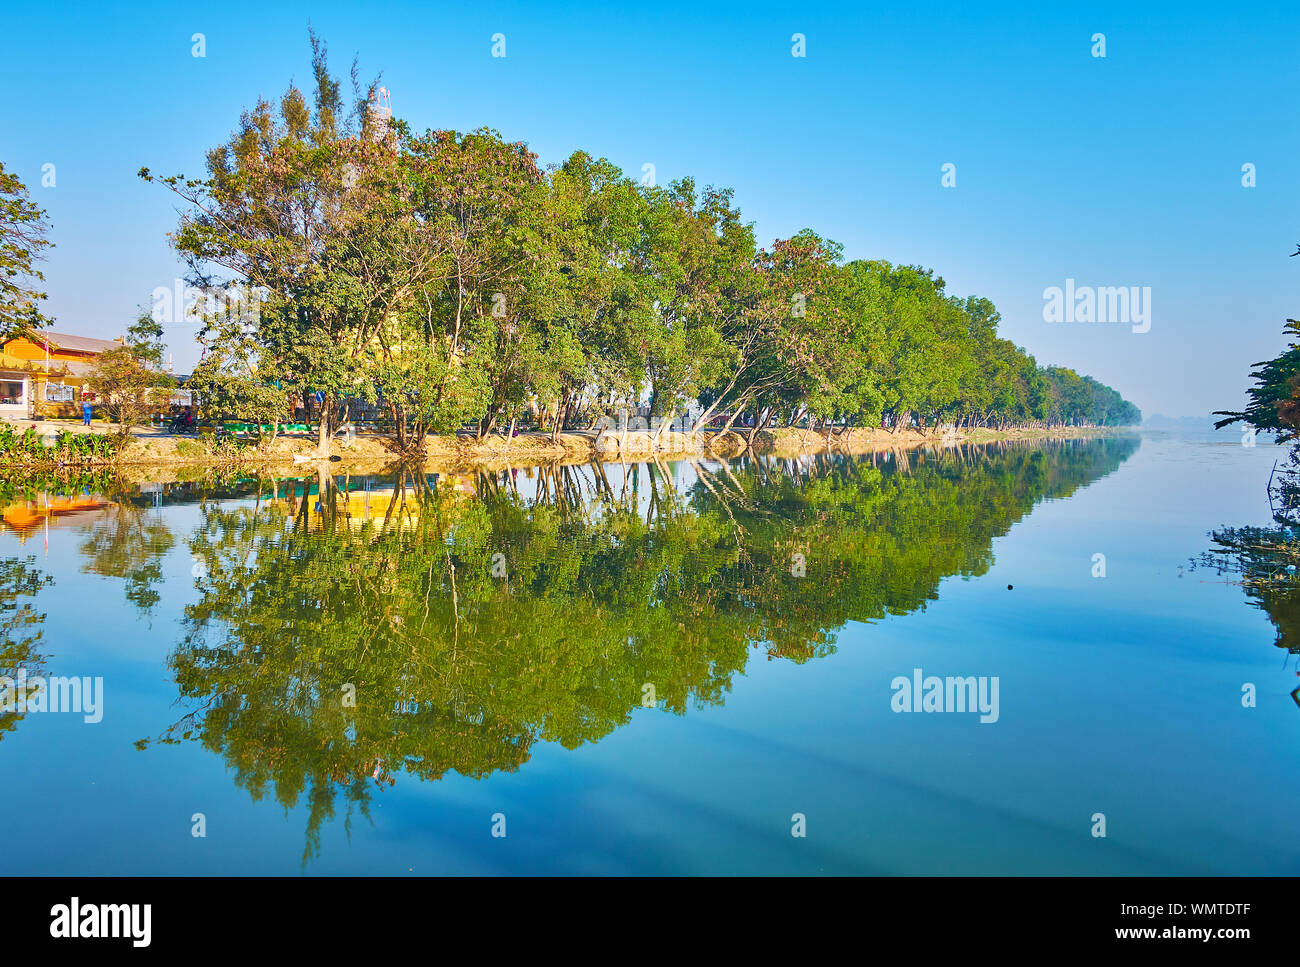 Tharzi pond boasts clear calm waters, reflecting line of tall shady trees, stretching along the banks, Nyaungshwe, Myanmar Stock Photo